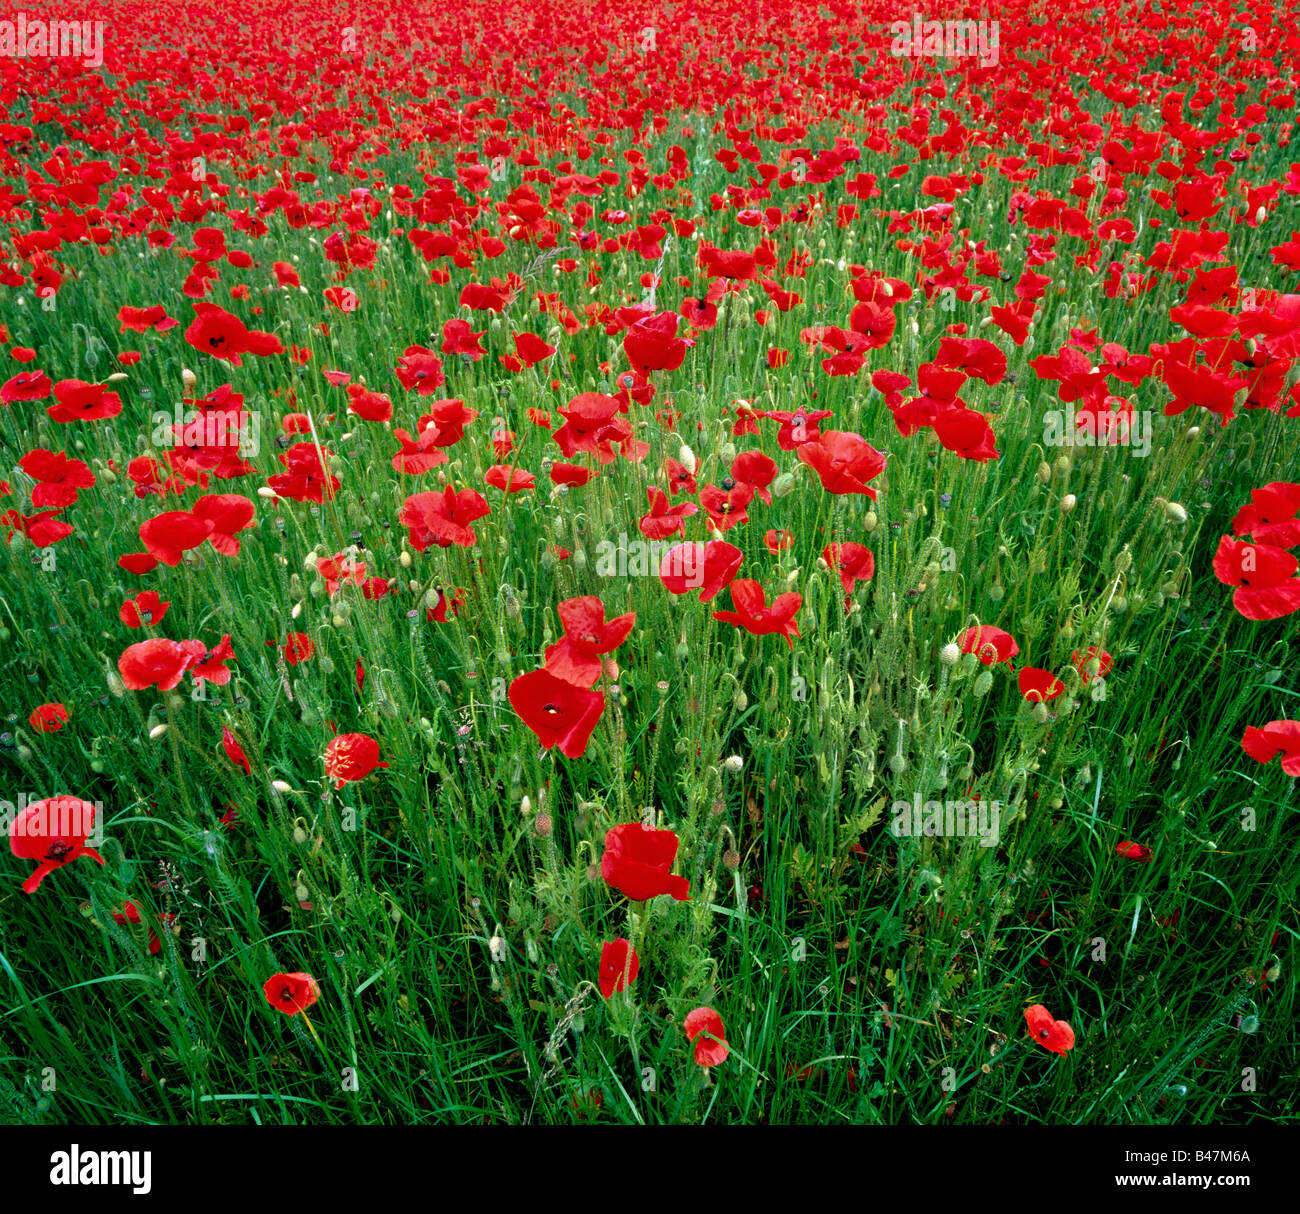 Field of bright red poppies. Stock Photo